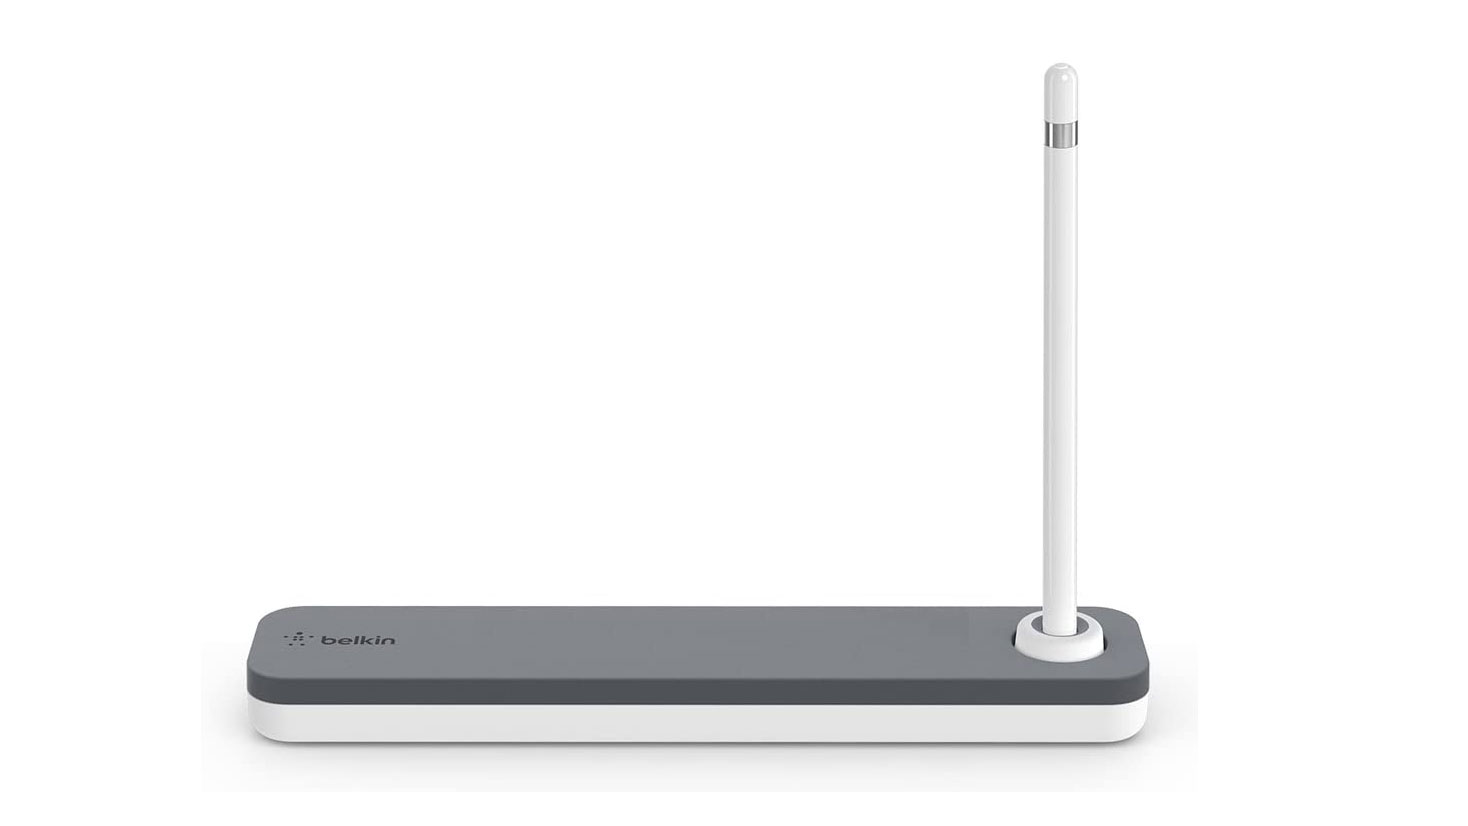 stop losing your apple pencil: apple pencil stand